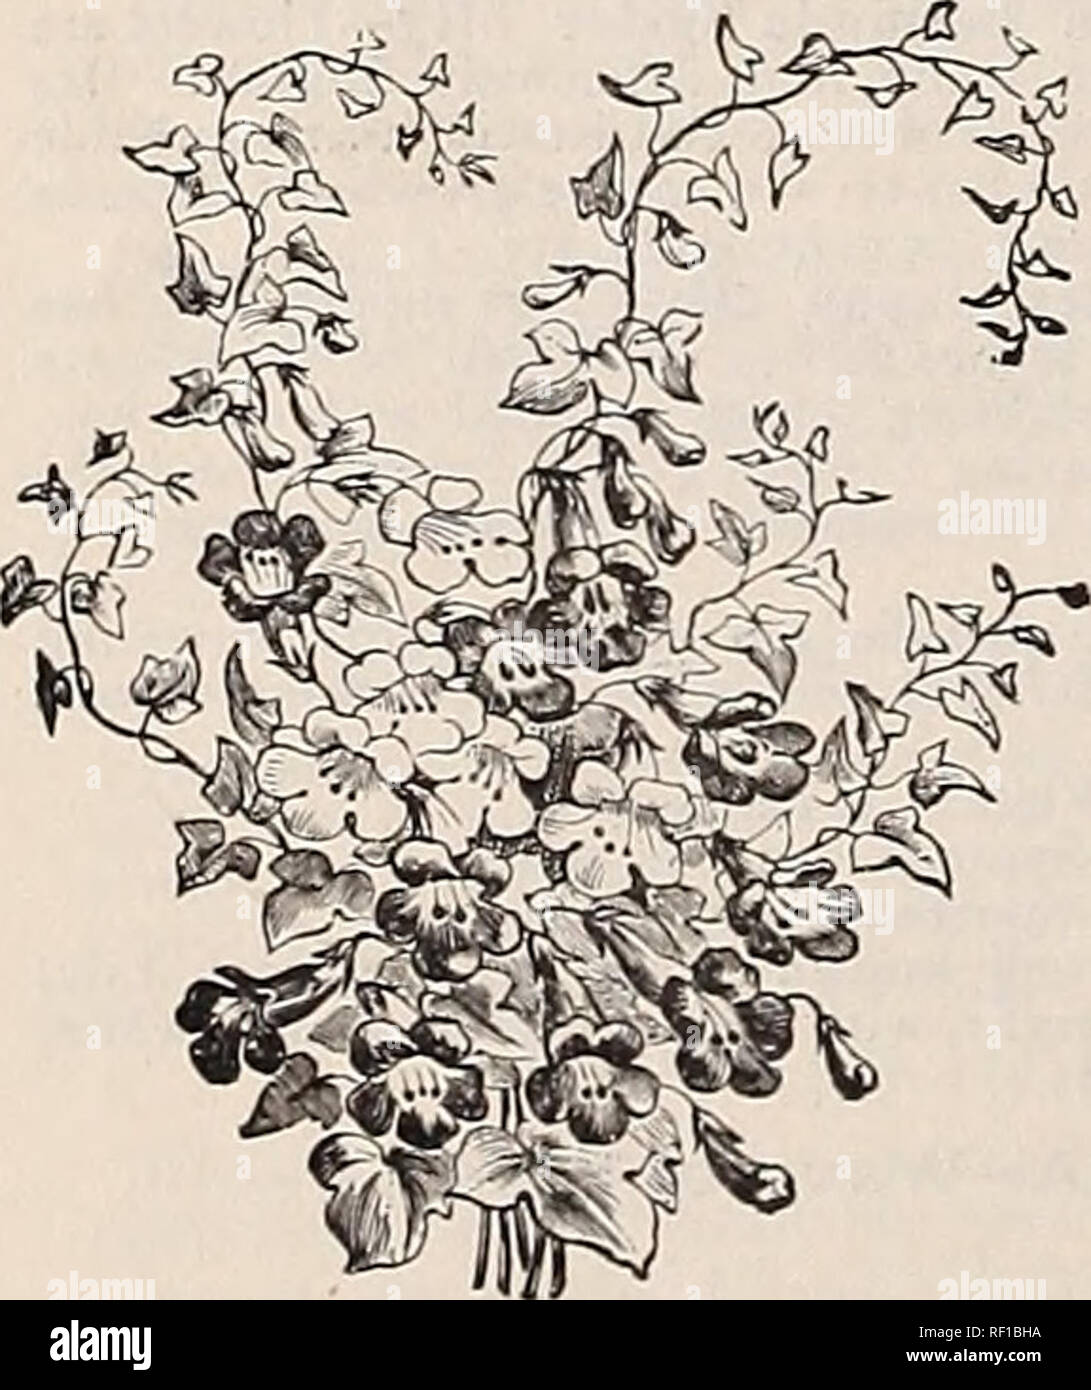 . [Catalogue of] Cottage Rose Garden, 1889. Nursery stock Ohio Catalogs; Flowers Catalogs. One of the most charming of spring flowering plants, producing m profusion its delicate bell-shaped delightfully fragrant white flowers. It will thrive in any common soil, and will do well in shady situations where fevv other plants will succeed. lo cents each; 60 cents per dozen. See cut. LOPEZIA ROSEA. Fine growing, red flowering plant, blooming continually from November to April. 10 cents. Alba—Same as above, white flowering. 10 cents. LOPHOSPERMUM SCANDENS. A handsome summer cUmbing plant of rapid gr Stock Photo